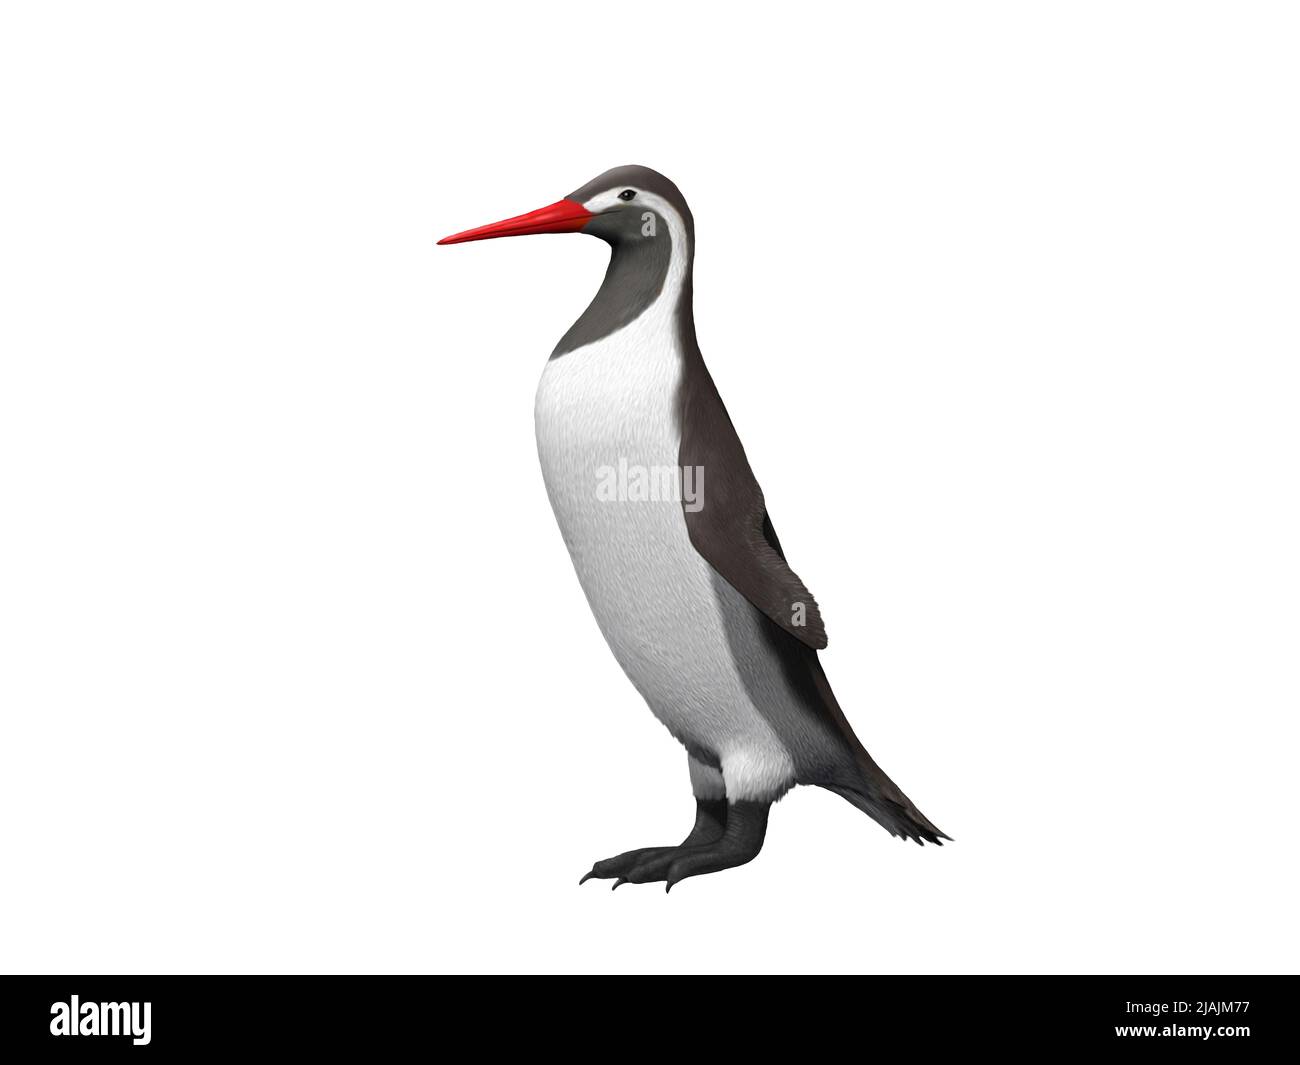 Kumimanu biceae, a giant penguin from the Paleocene epoch of New Zealand. Stock Photo